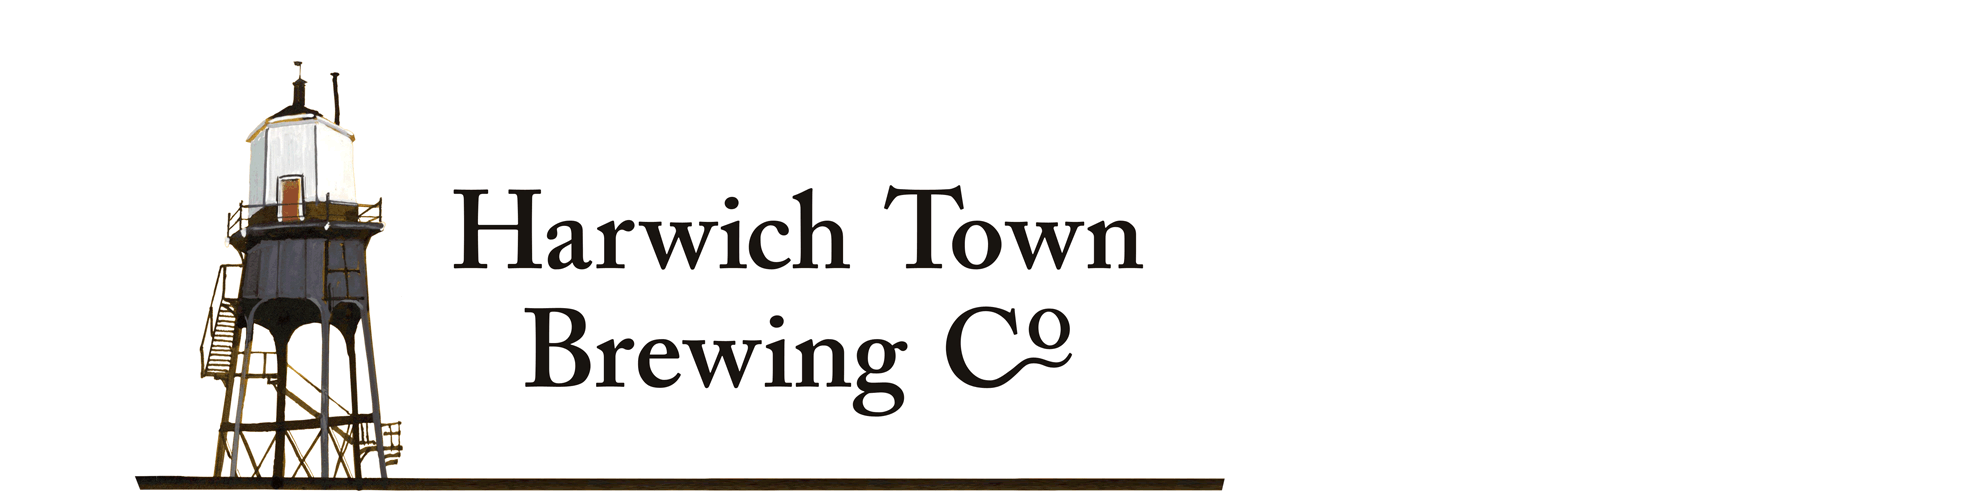 Harwich Town Brewing Co